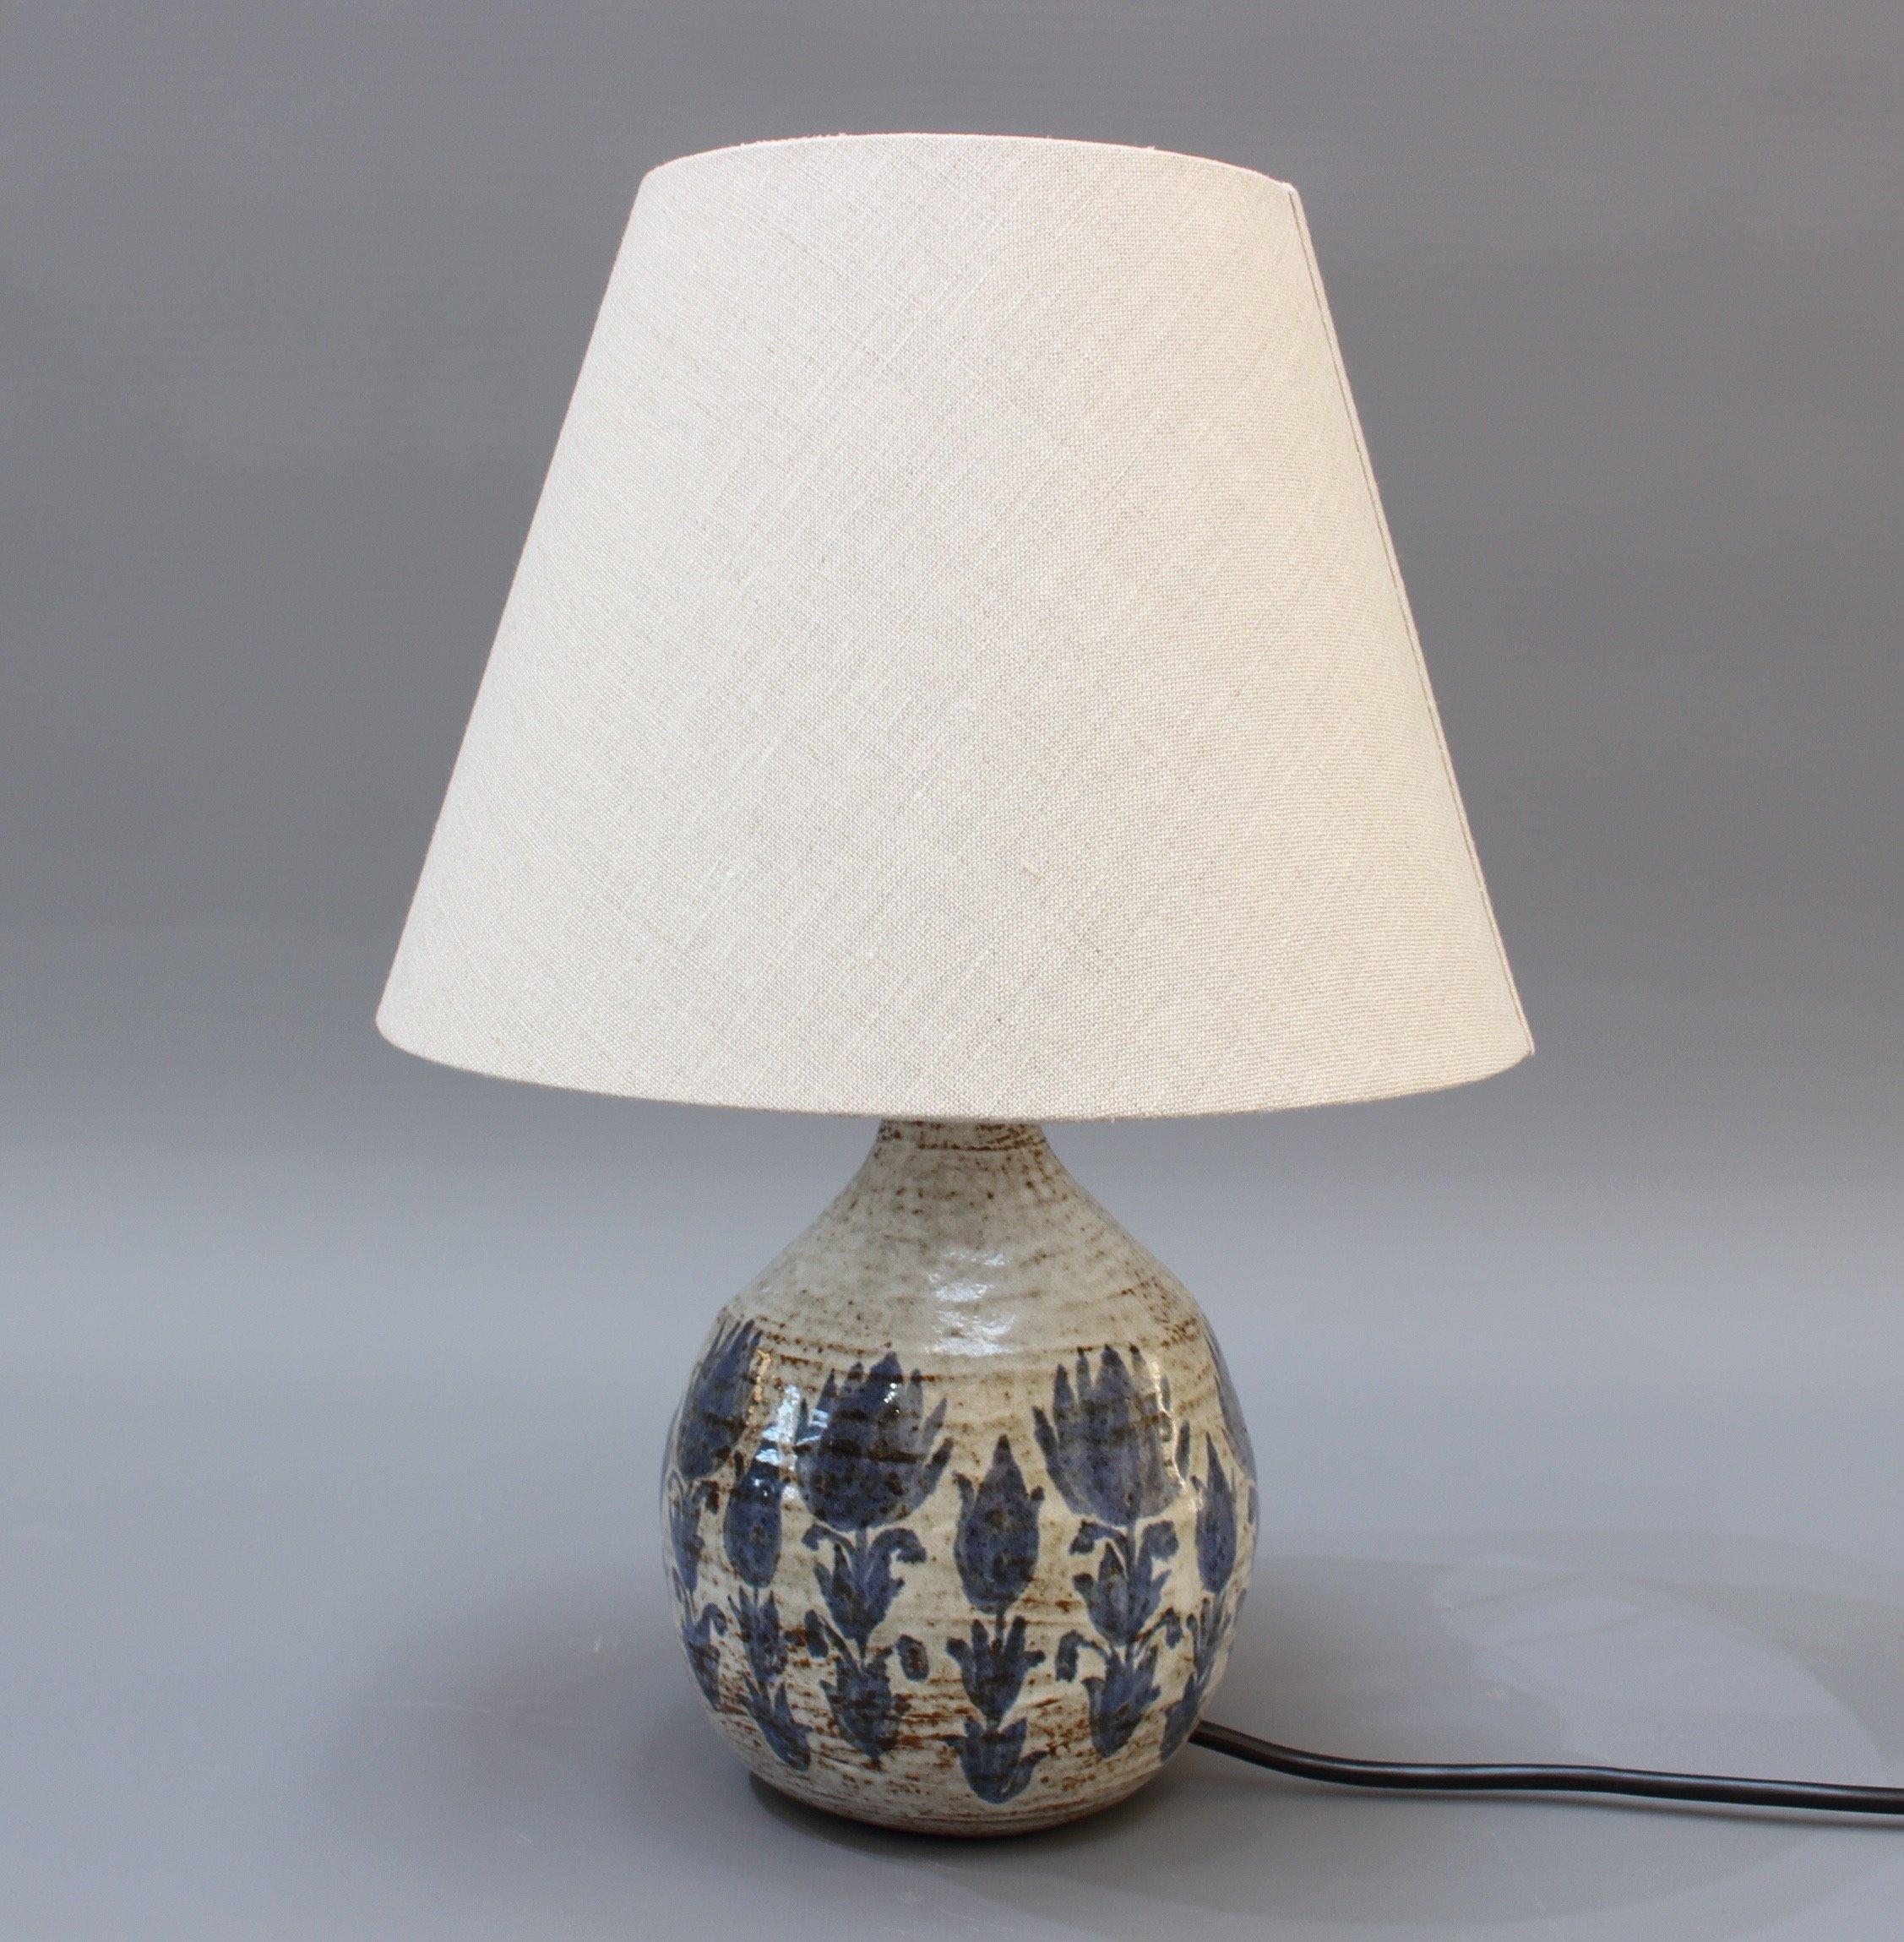 Midcentury ceramic lamp with blue flower motif (circa 1960s). A chalk-white base glaze with scattered brown speckles and lines is covered with hand painted blue flowers over this diminutive, charming flask-shaped table lamp. In good vintage